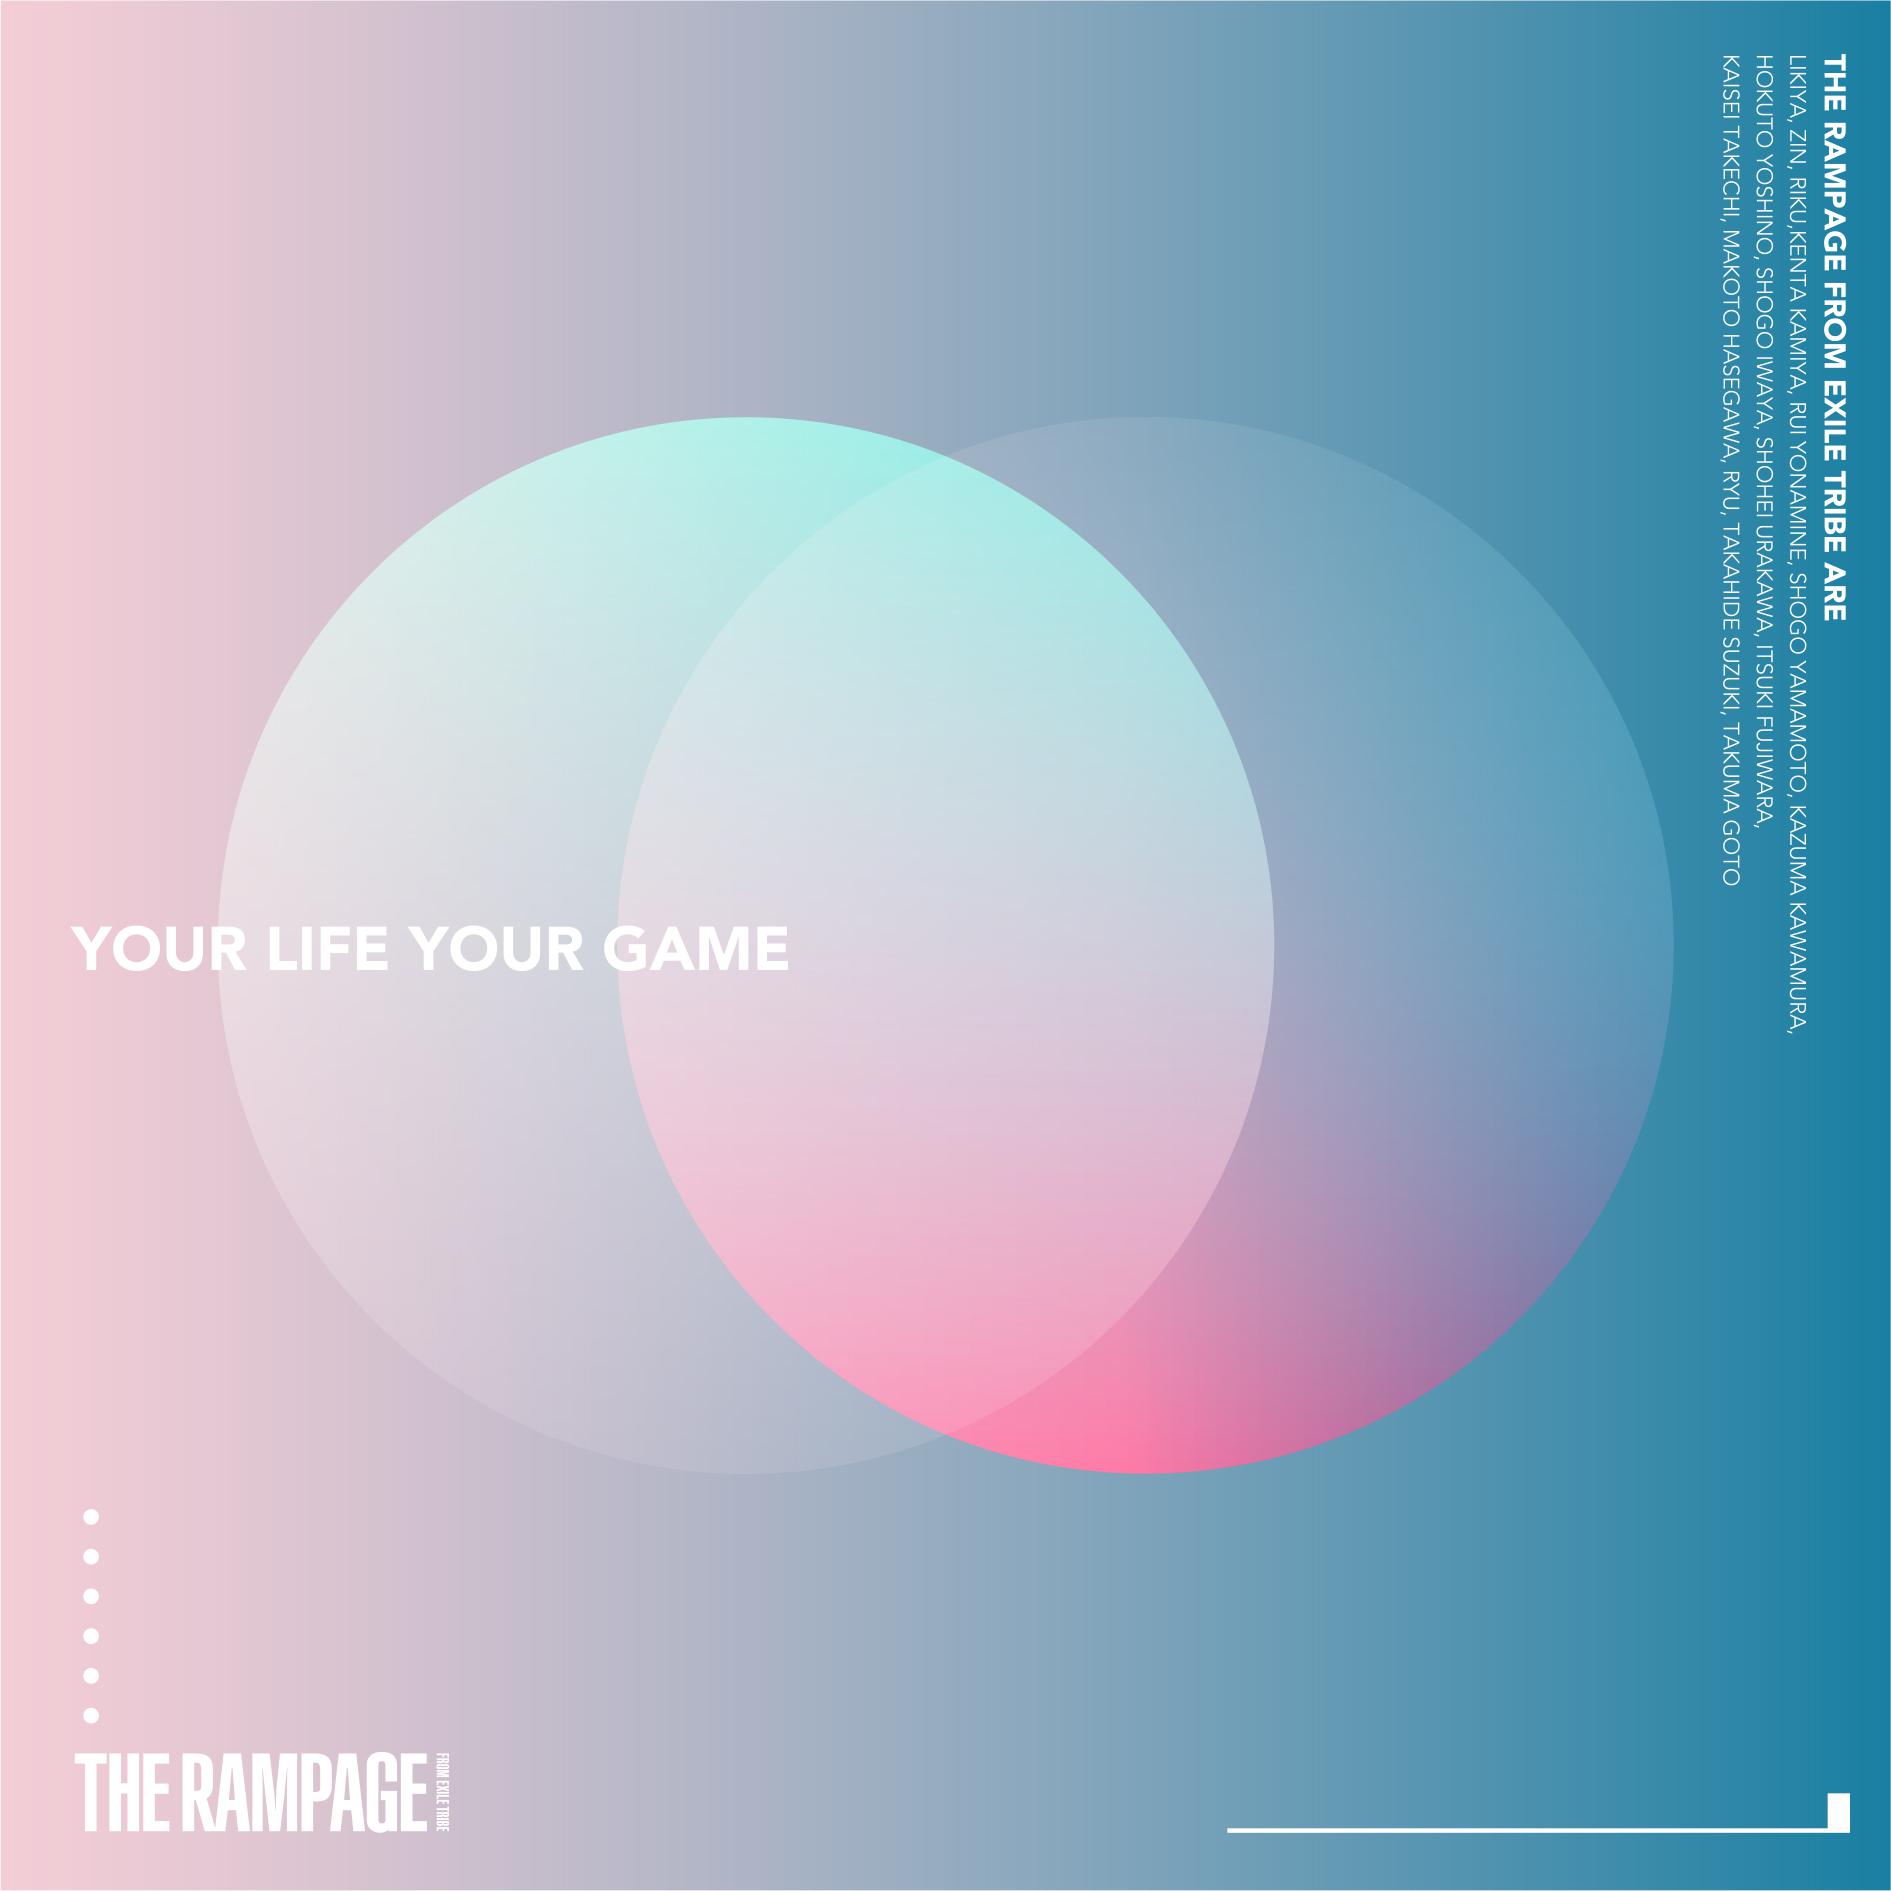 YOUR LIFE YOUR GAME歌词 歌手THE RAMPAGE from EXILE TRIBE-专辑YOUR LIFE YOUR GAME-单曲《YOUR LIFE YOUR GAME》LRC歌词下载